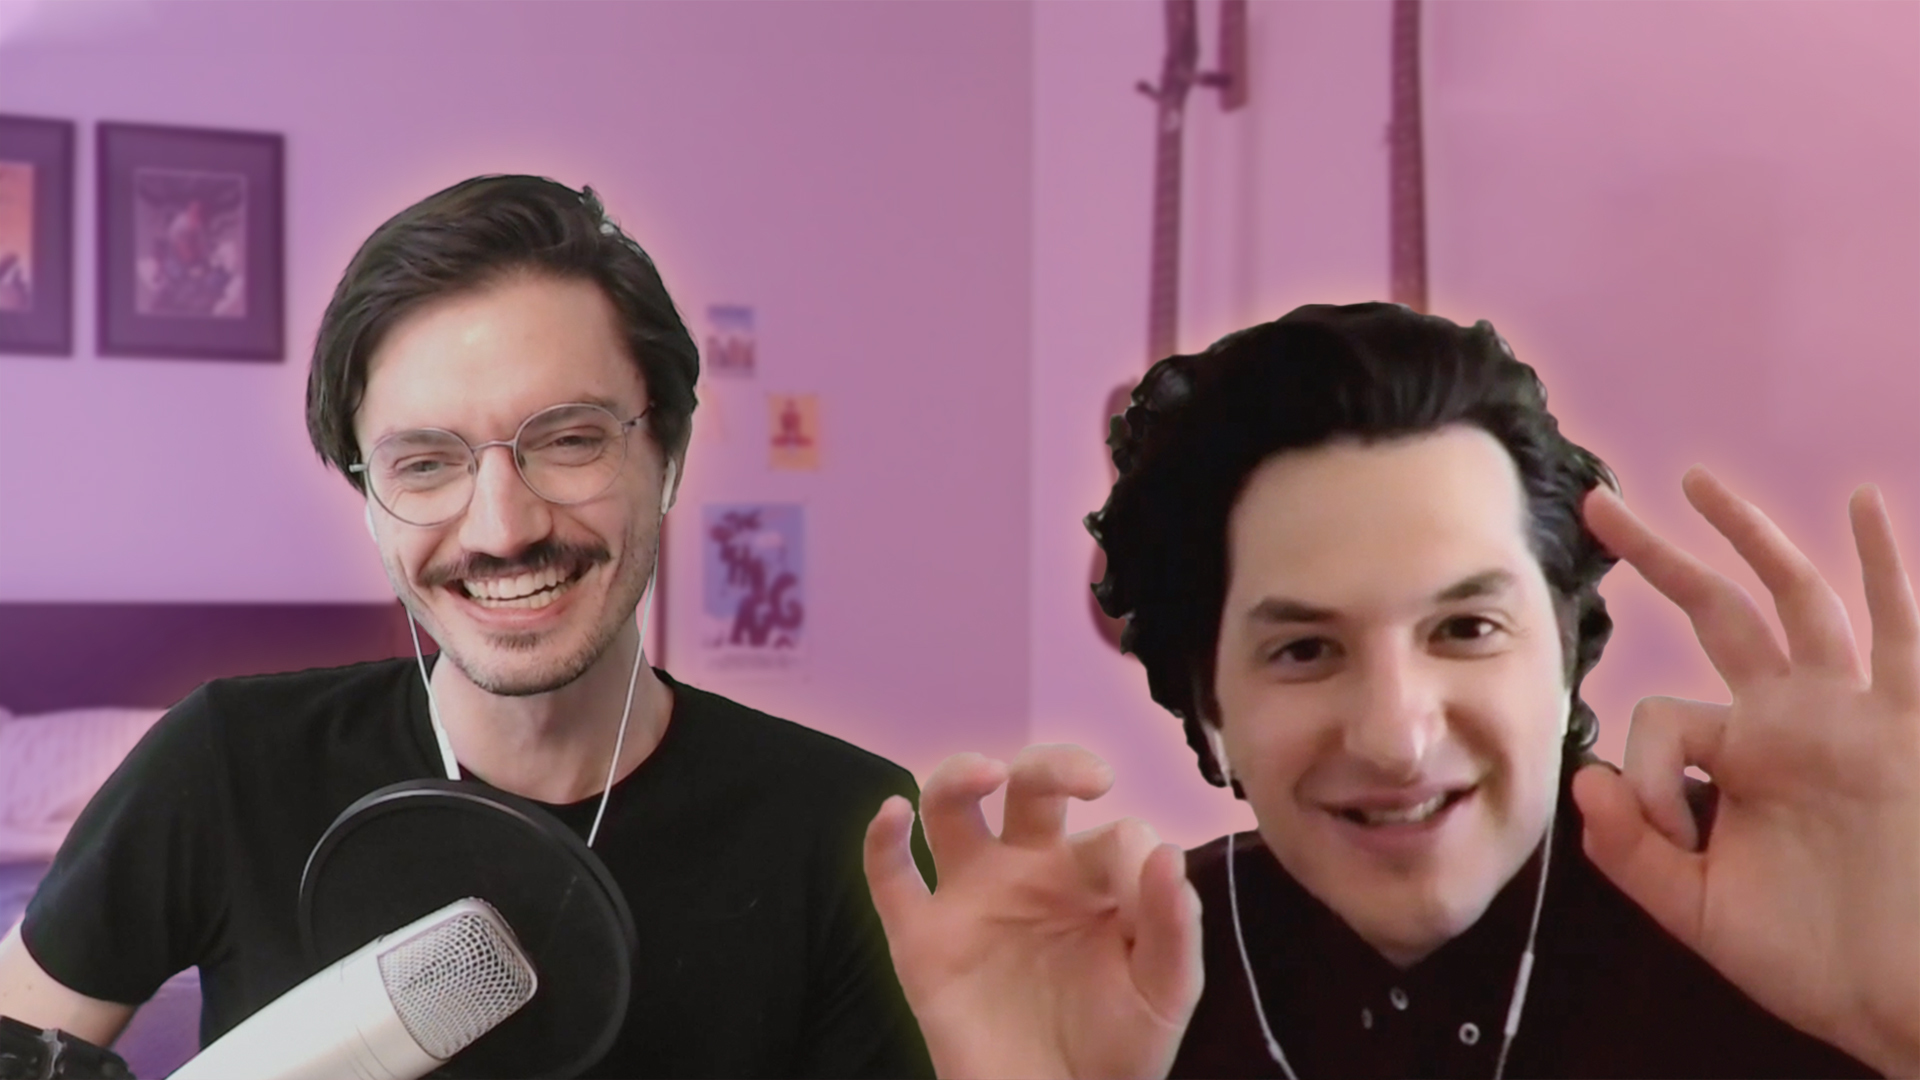 Ben Schwartz and Patrick Gill have a chat on Zoom